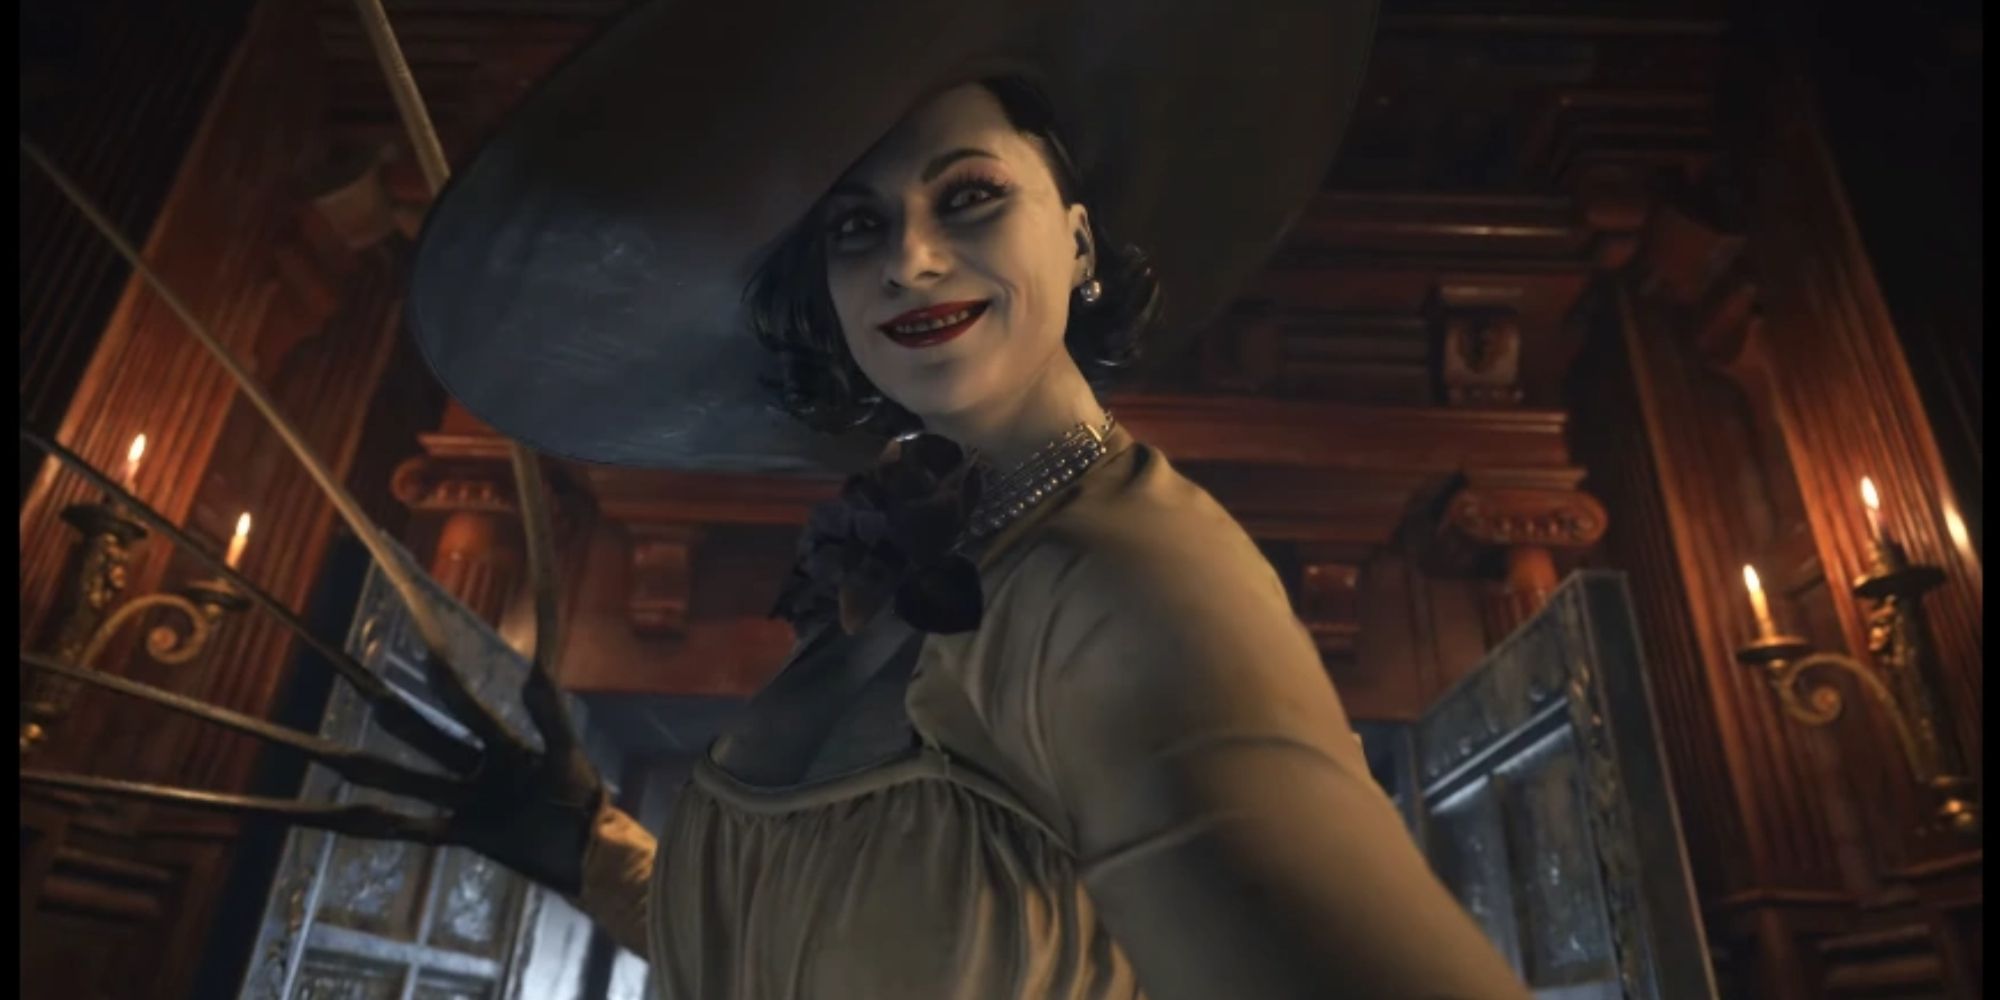 Image of Lady Dimitrescu in Resident Evil Village. The pale vampire villain has her fingers extended into blades, ready to strike with a sinister grin.